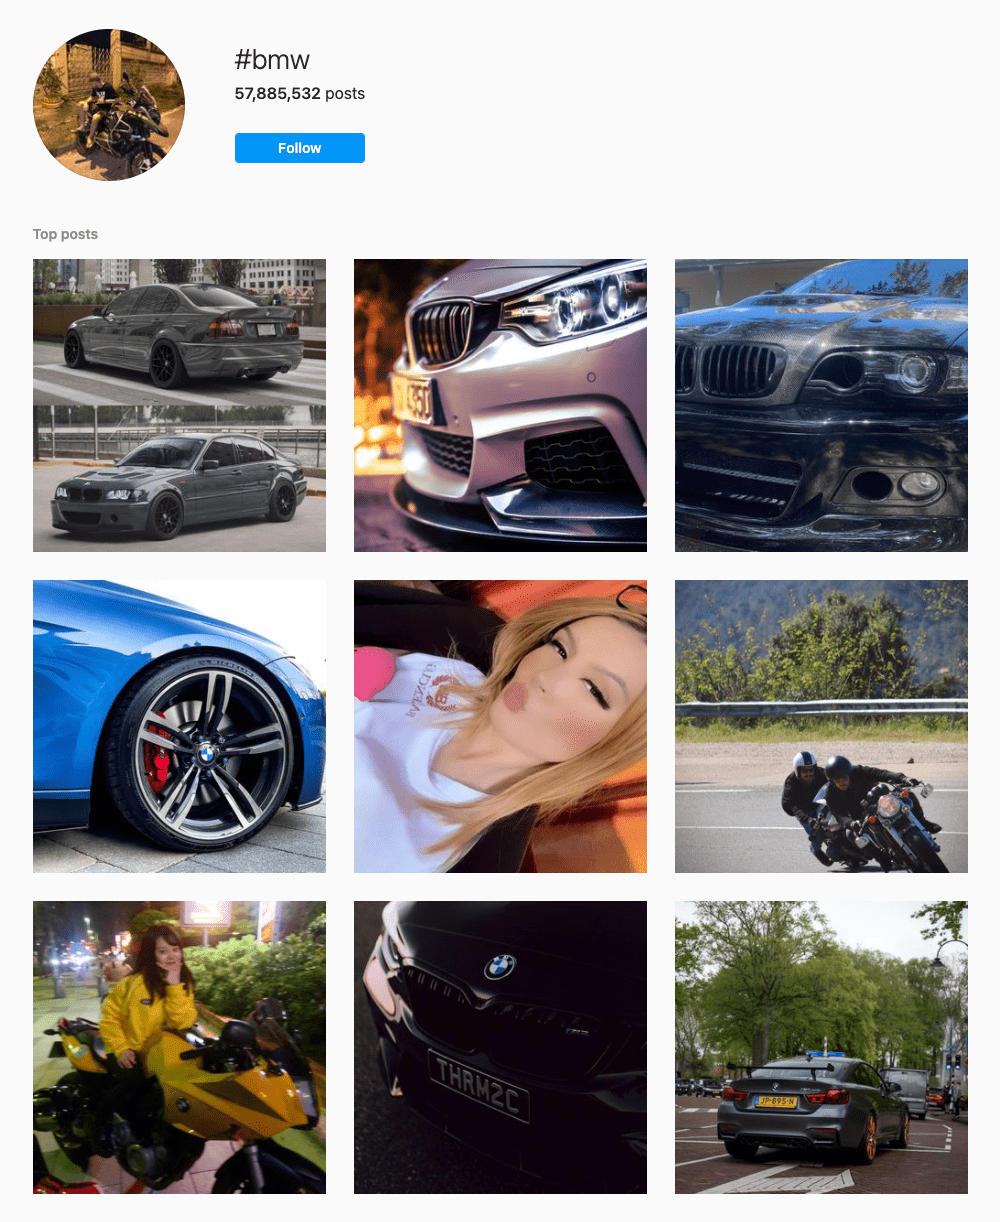 #bmw Hashtags for Instagram